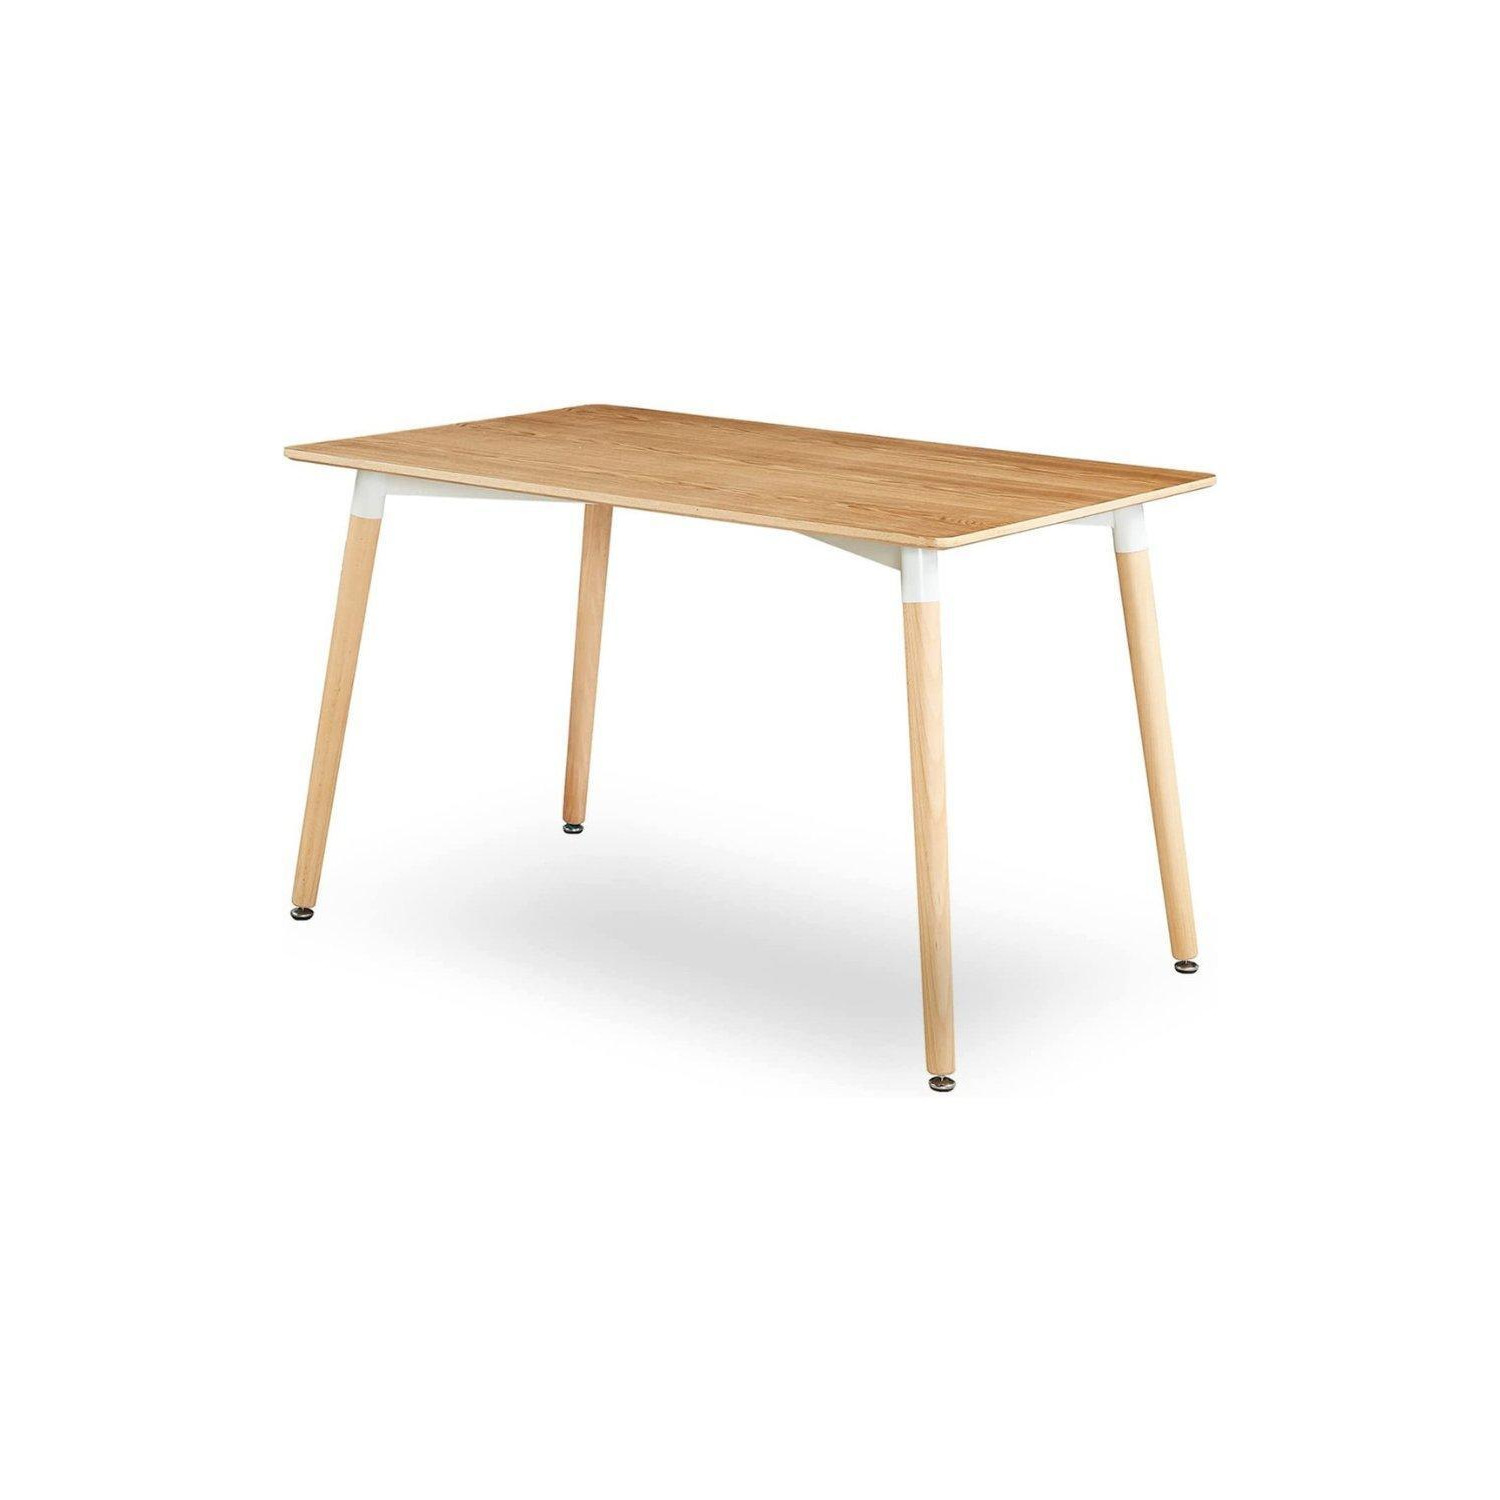 'Halo' 4 or 6 Seating Dining Table Single - image 1